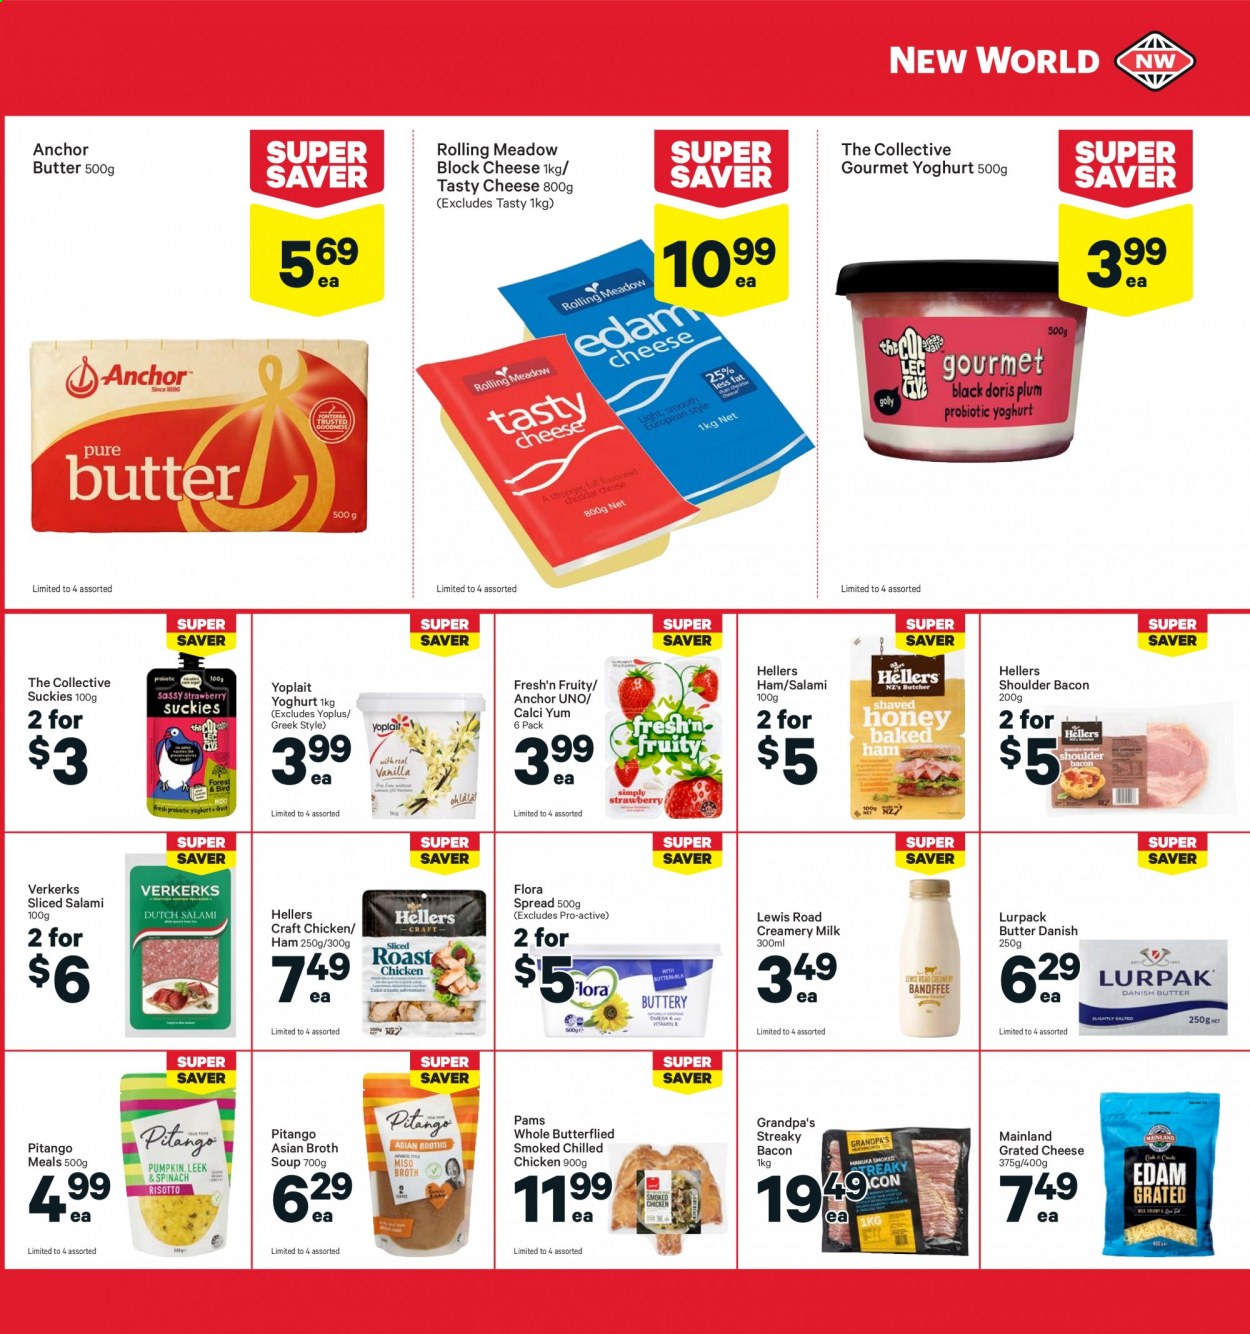 thumbnail - New World mailer - 19.07.2021 - 25.07.2021 - Sales products - soup, bacon, salami, ham, shoulder bacon, streaky bacon, cheese, grated cheese, yoghurt, Fresh'n Fruity, Yoplait, milk, butter, Flora, Anchor, broth. Page 23.